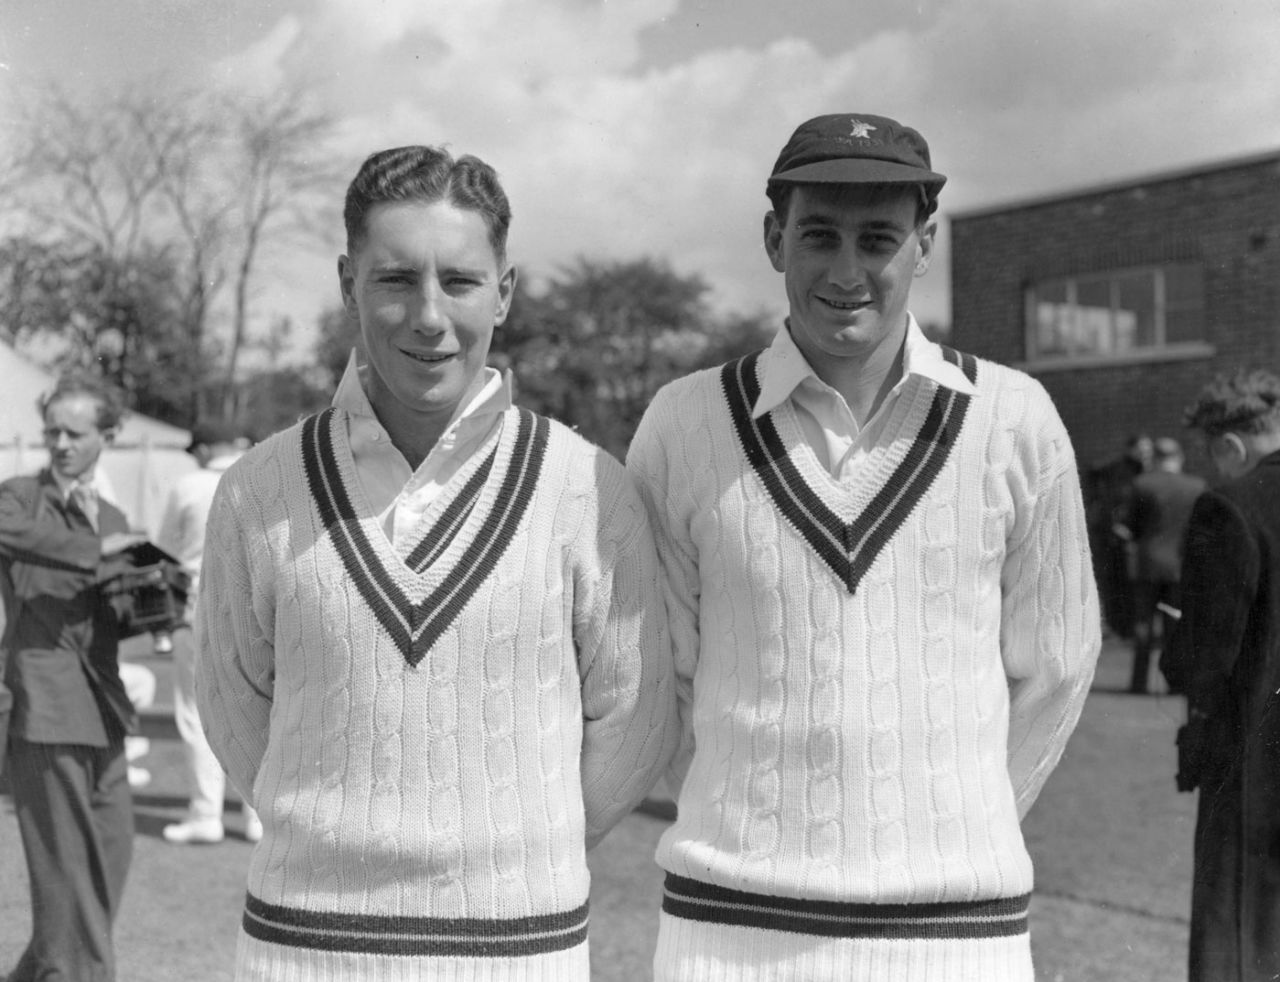 Batsman Roy McLean and offspinner Hugh Tayfield, from Natal, are part of South Africa's touring squad to England, May 5, 1955